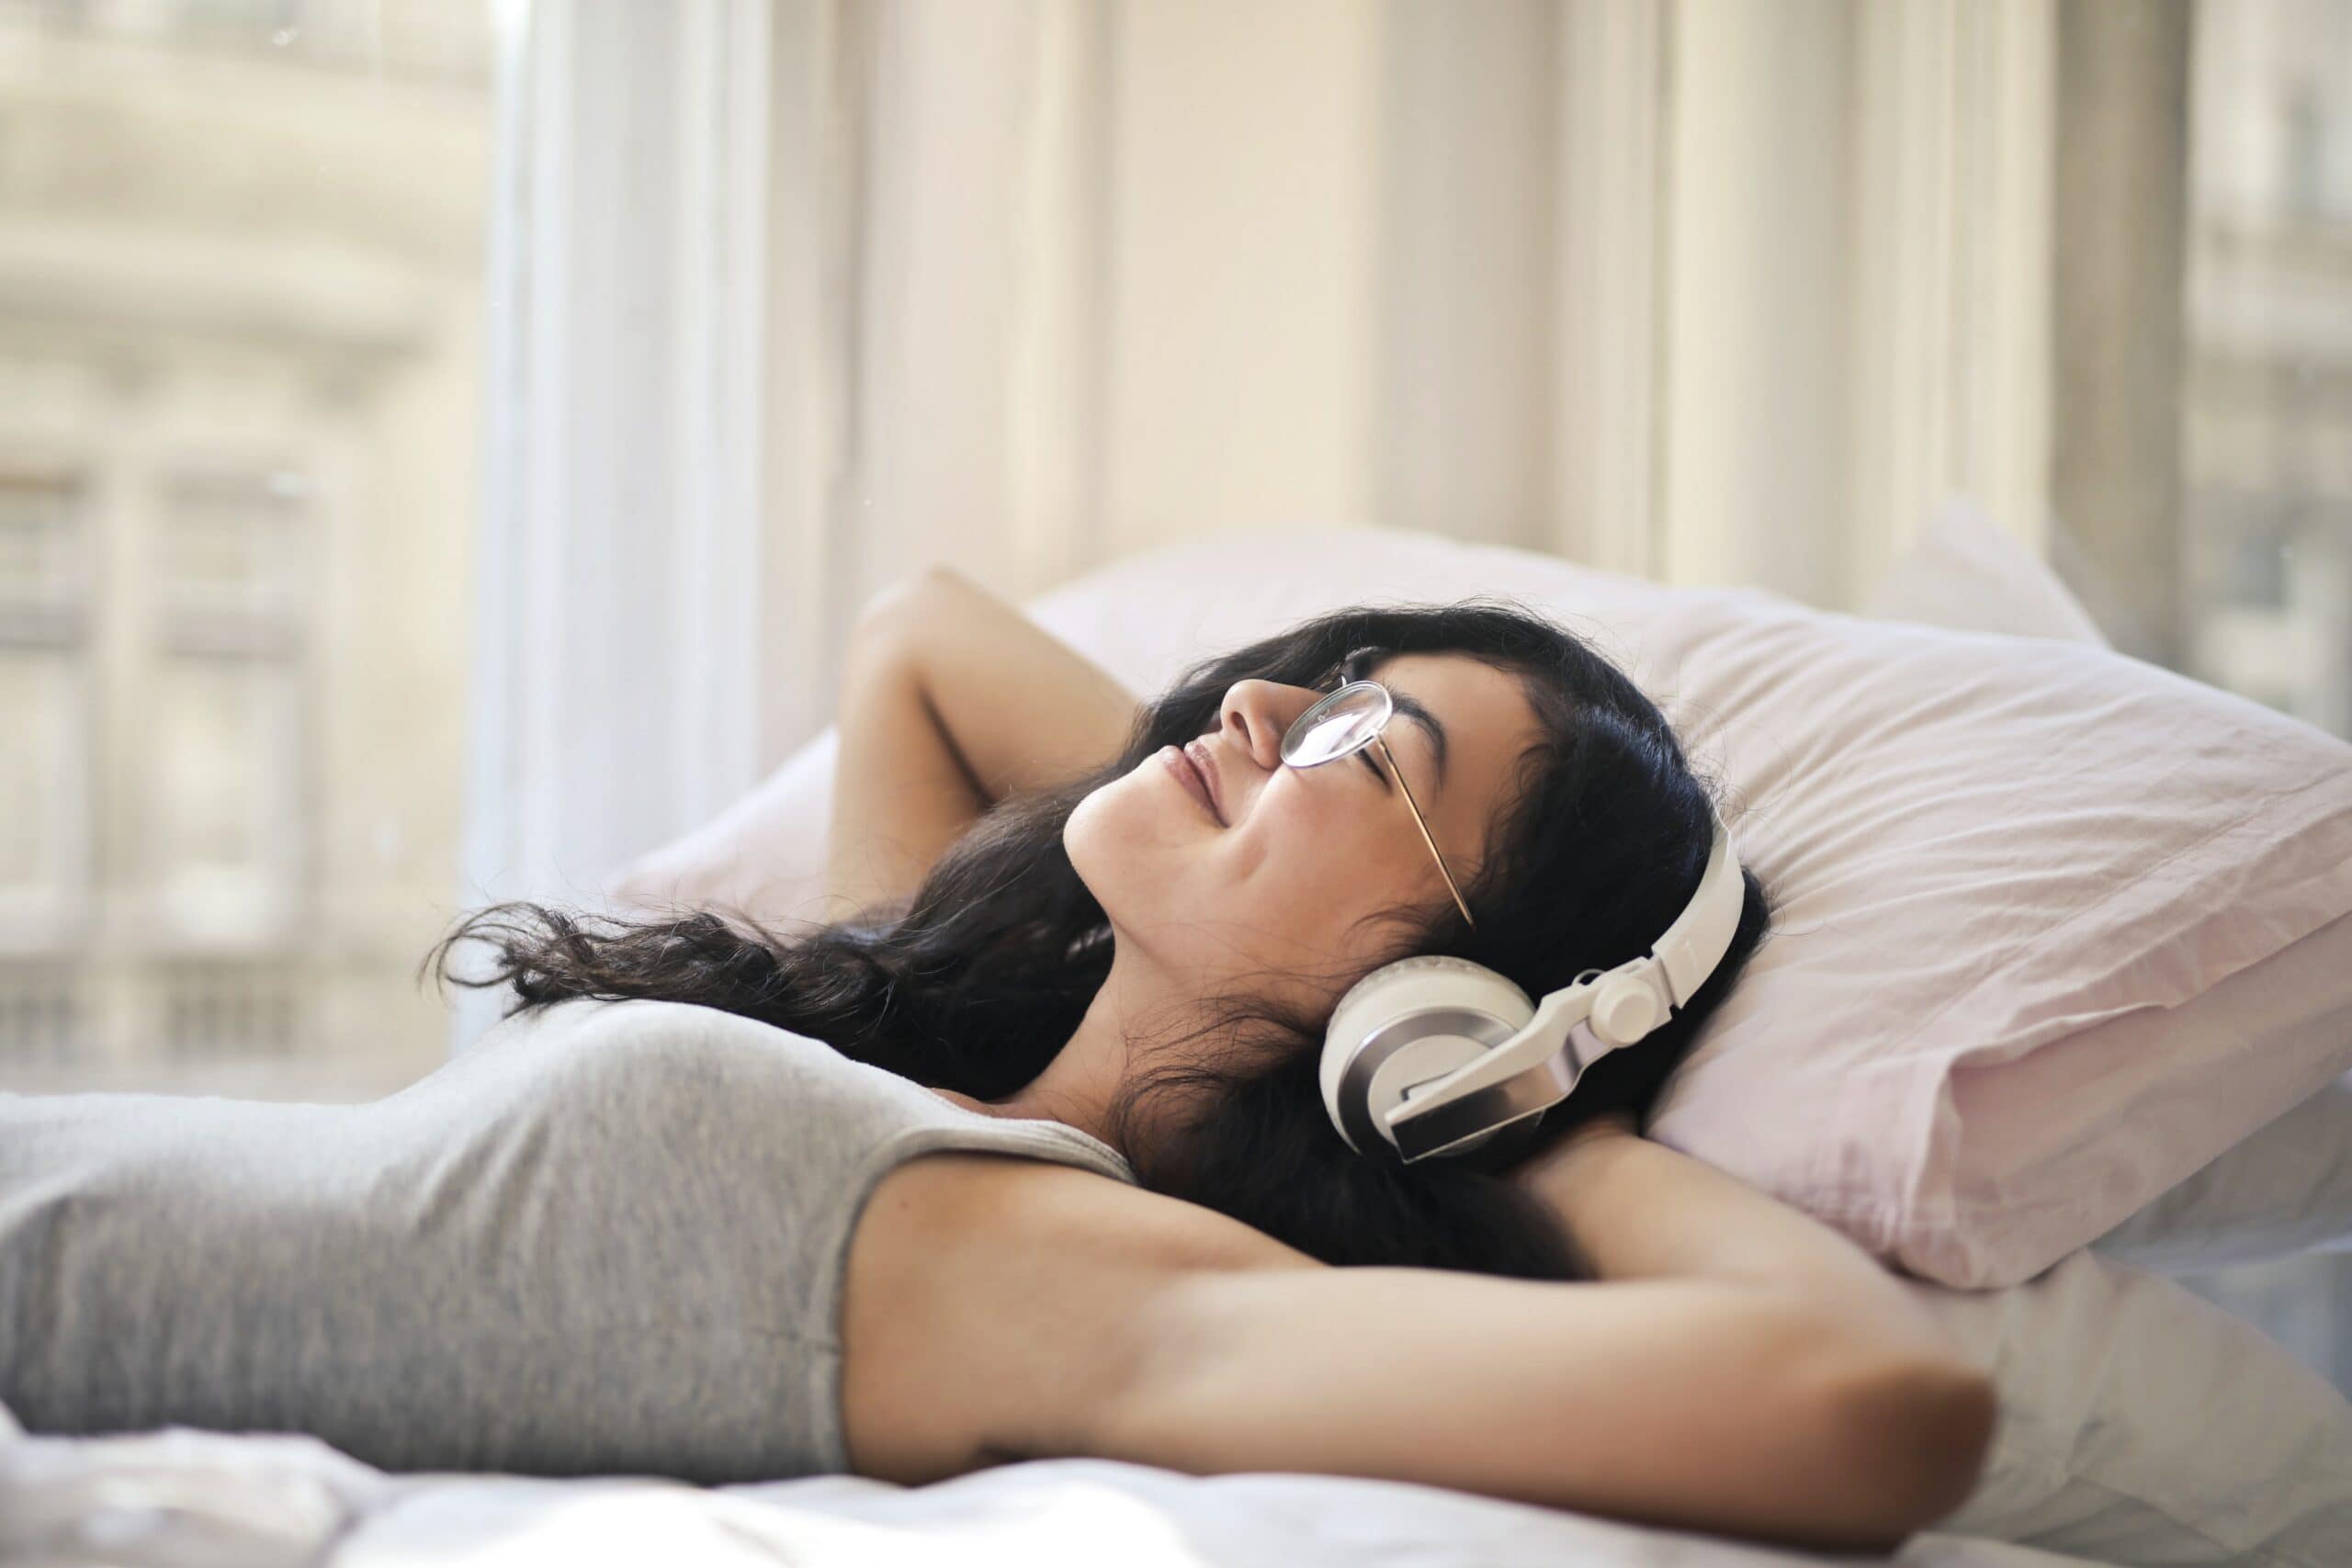 Woman relaxing and listening to music. Courtesy of Pexels.com/Andrea Piacquadio.